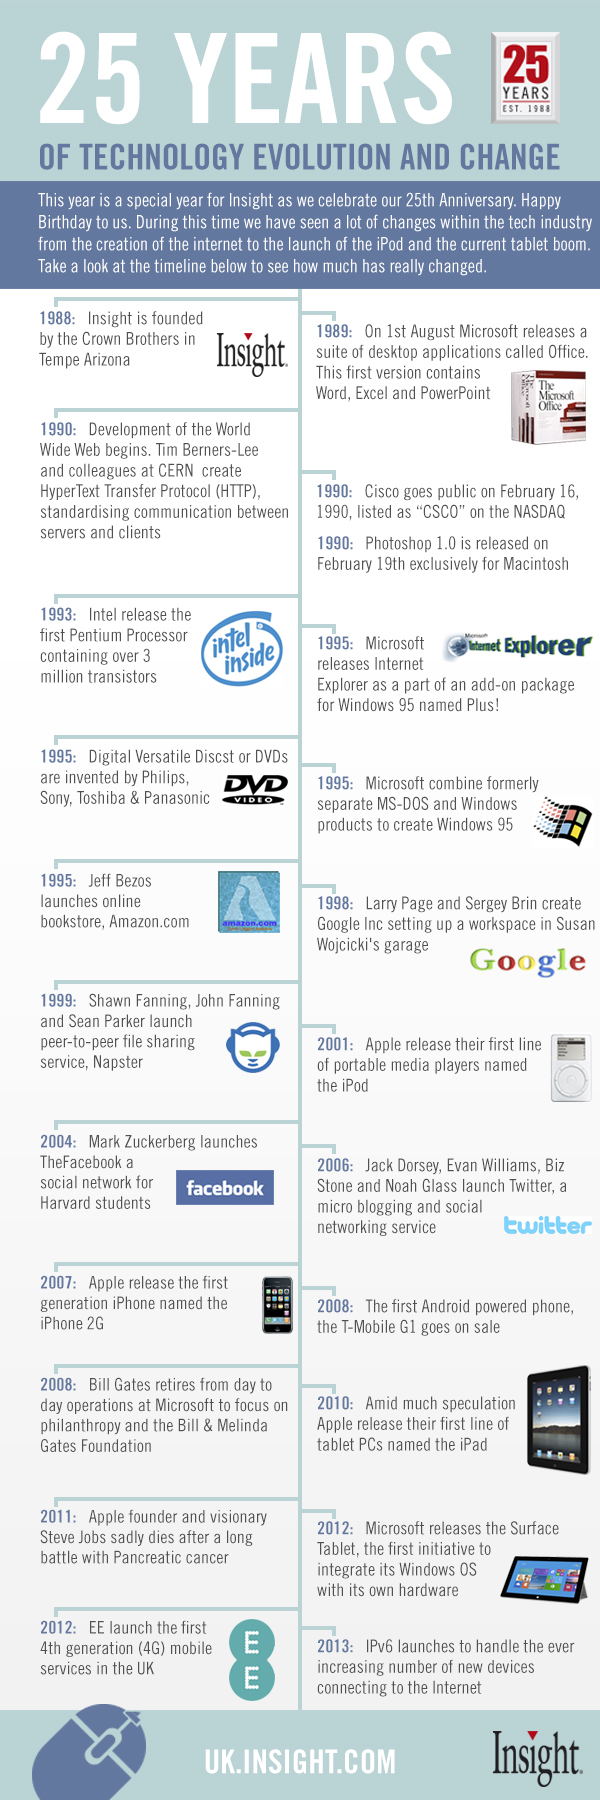 [Infographic] 25 Years of Technology Evolution and Change